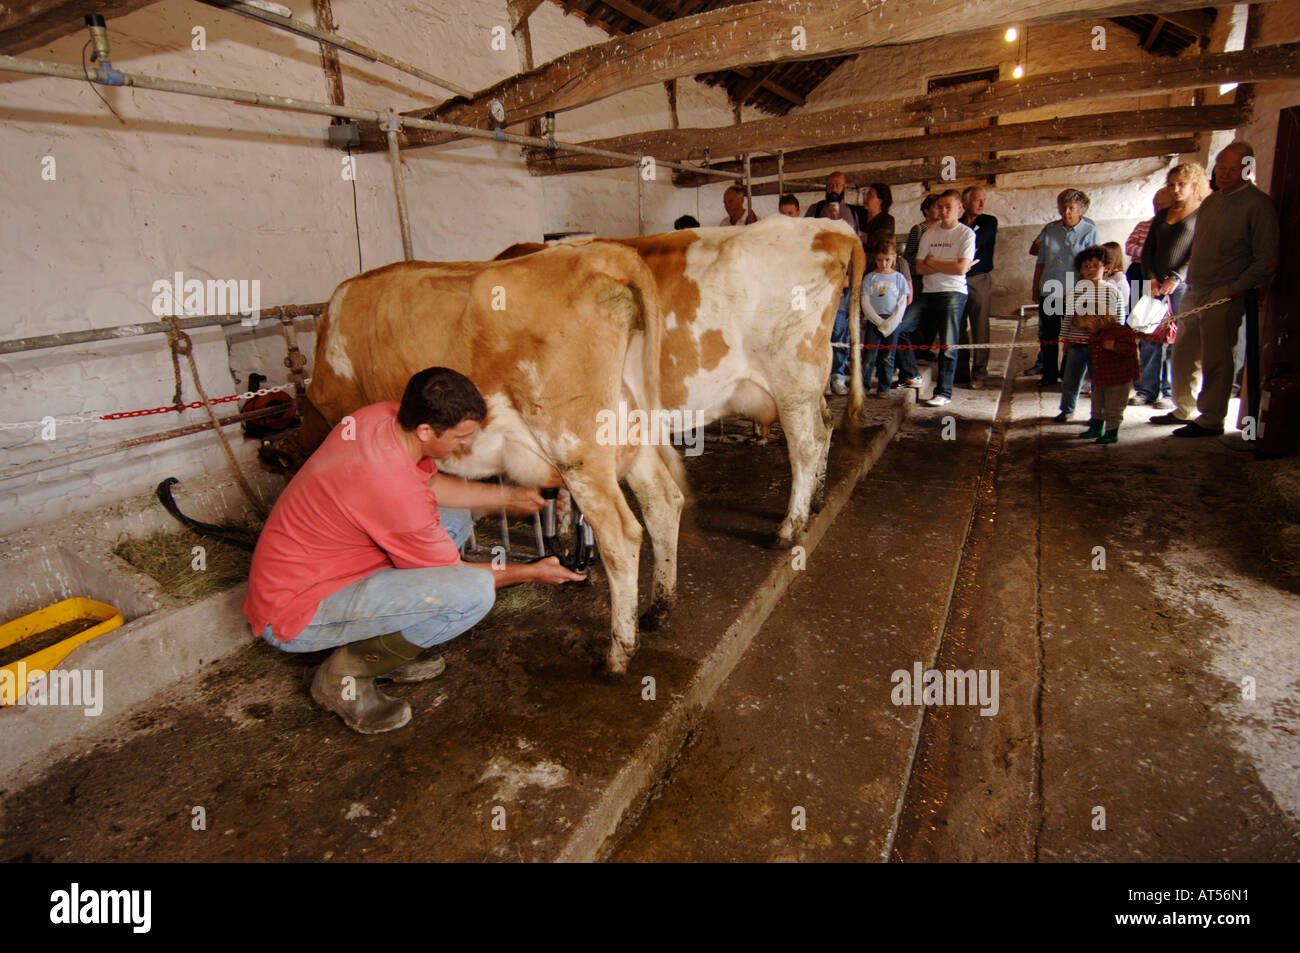 A man demonstrating milking cows by hand at llanerchaeron  ceredigion wales Stock Photo